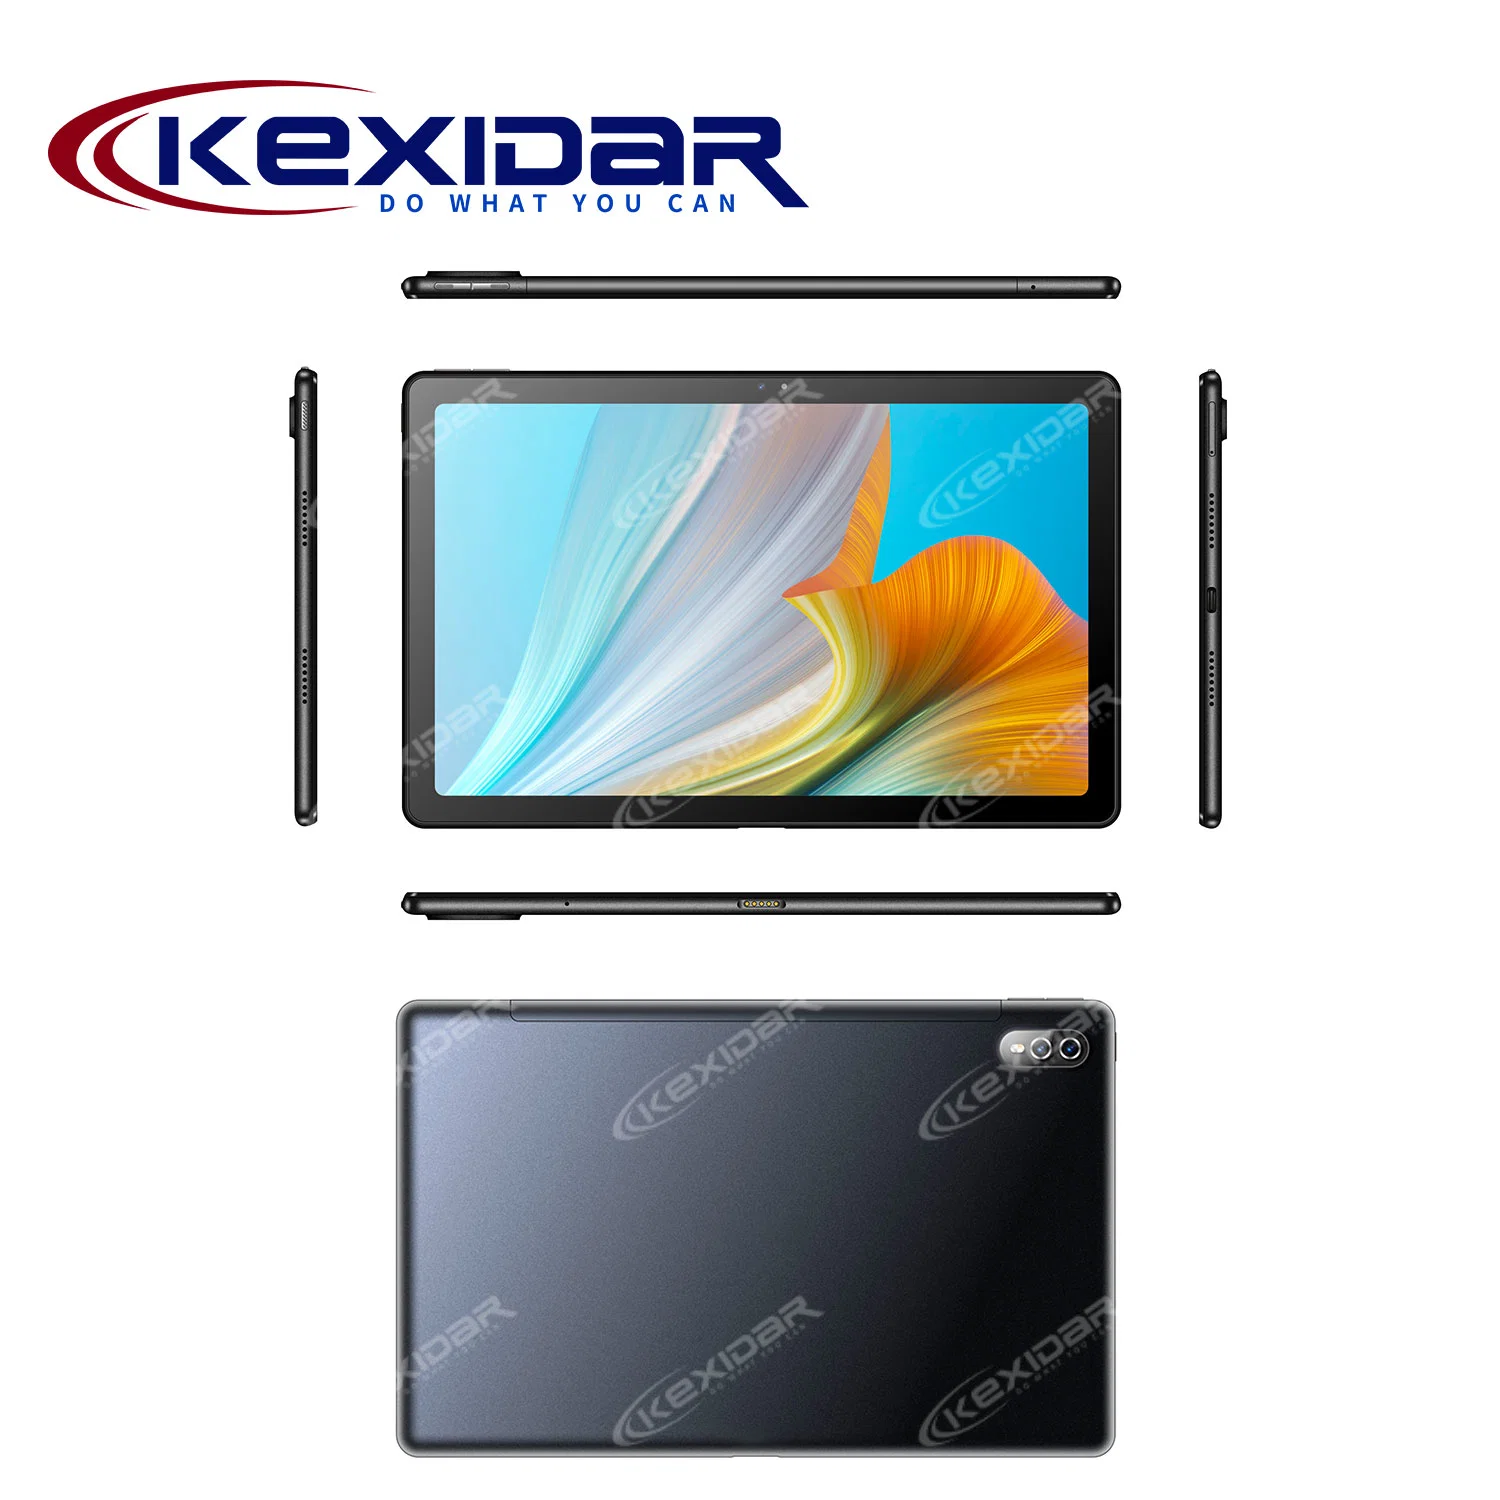 Kexidar Office Learning 10.4 Inch Octa-Core 4+64GB WiFi Android Mini Tablet PC